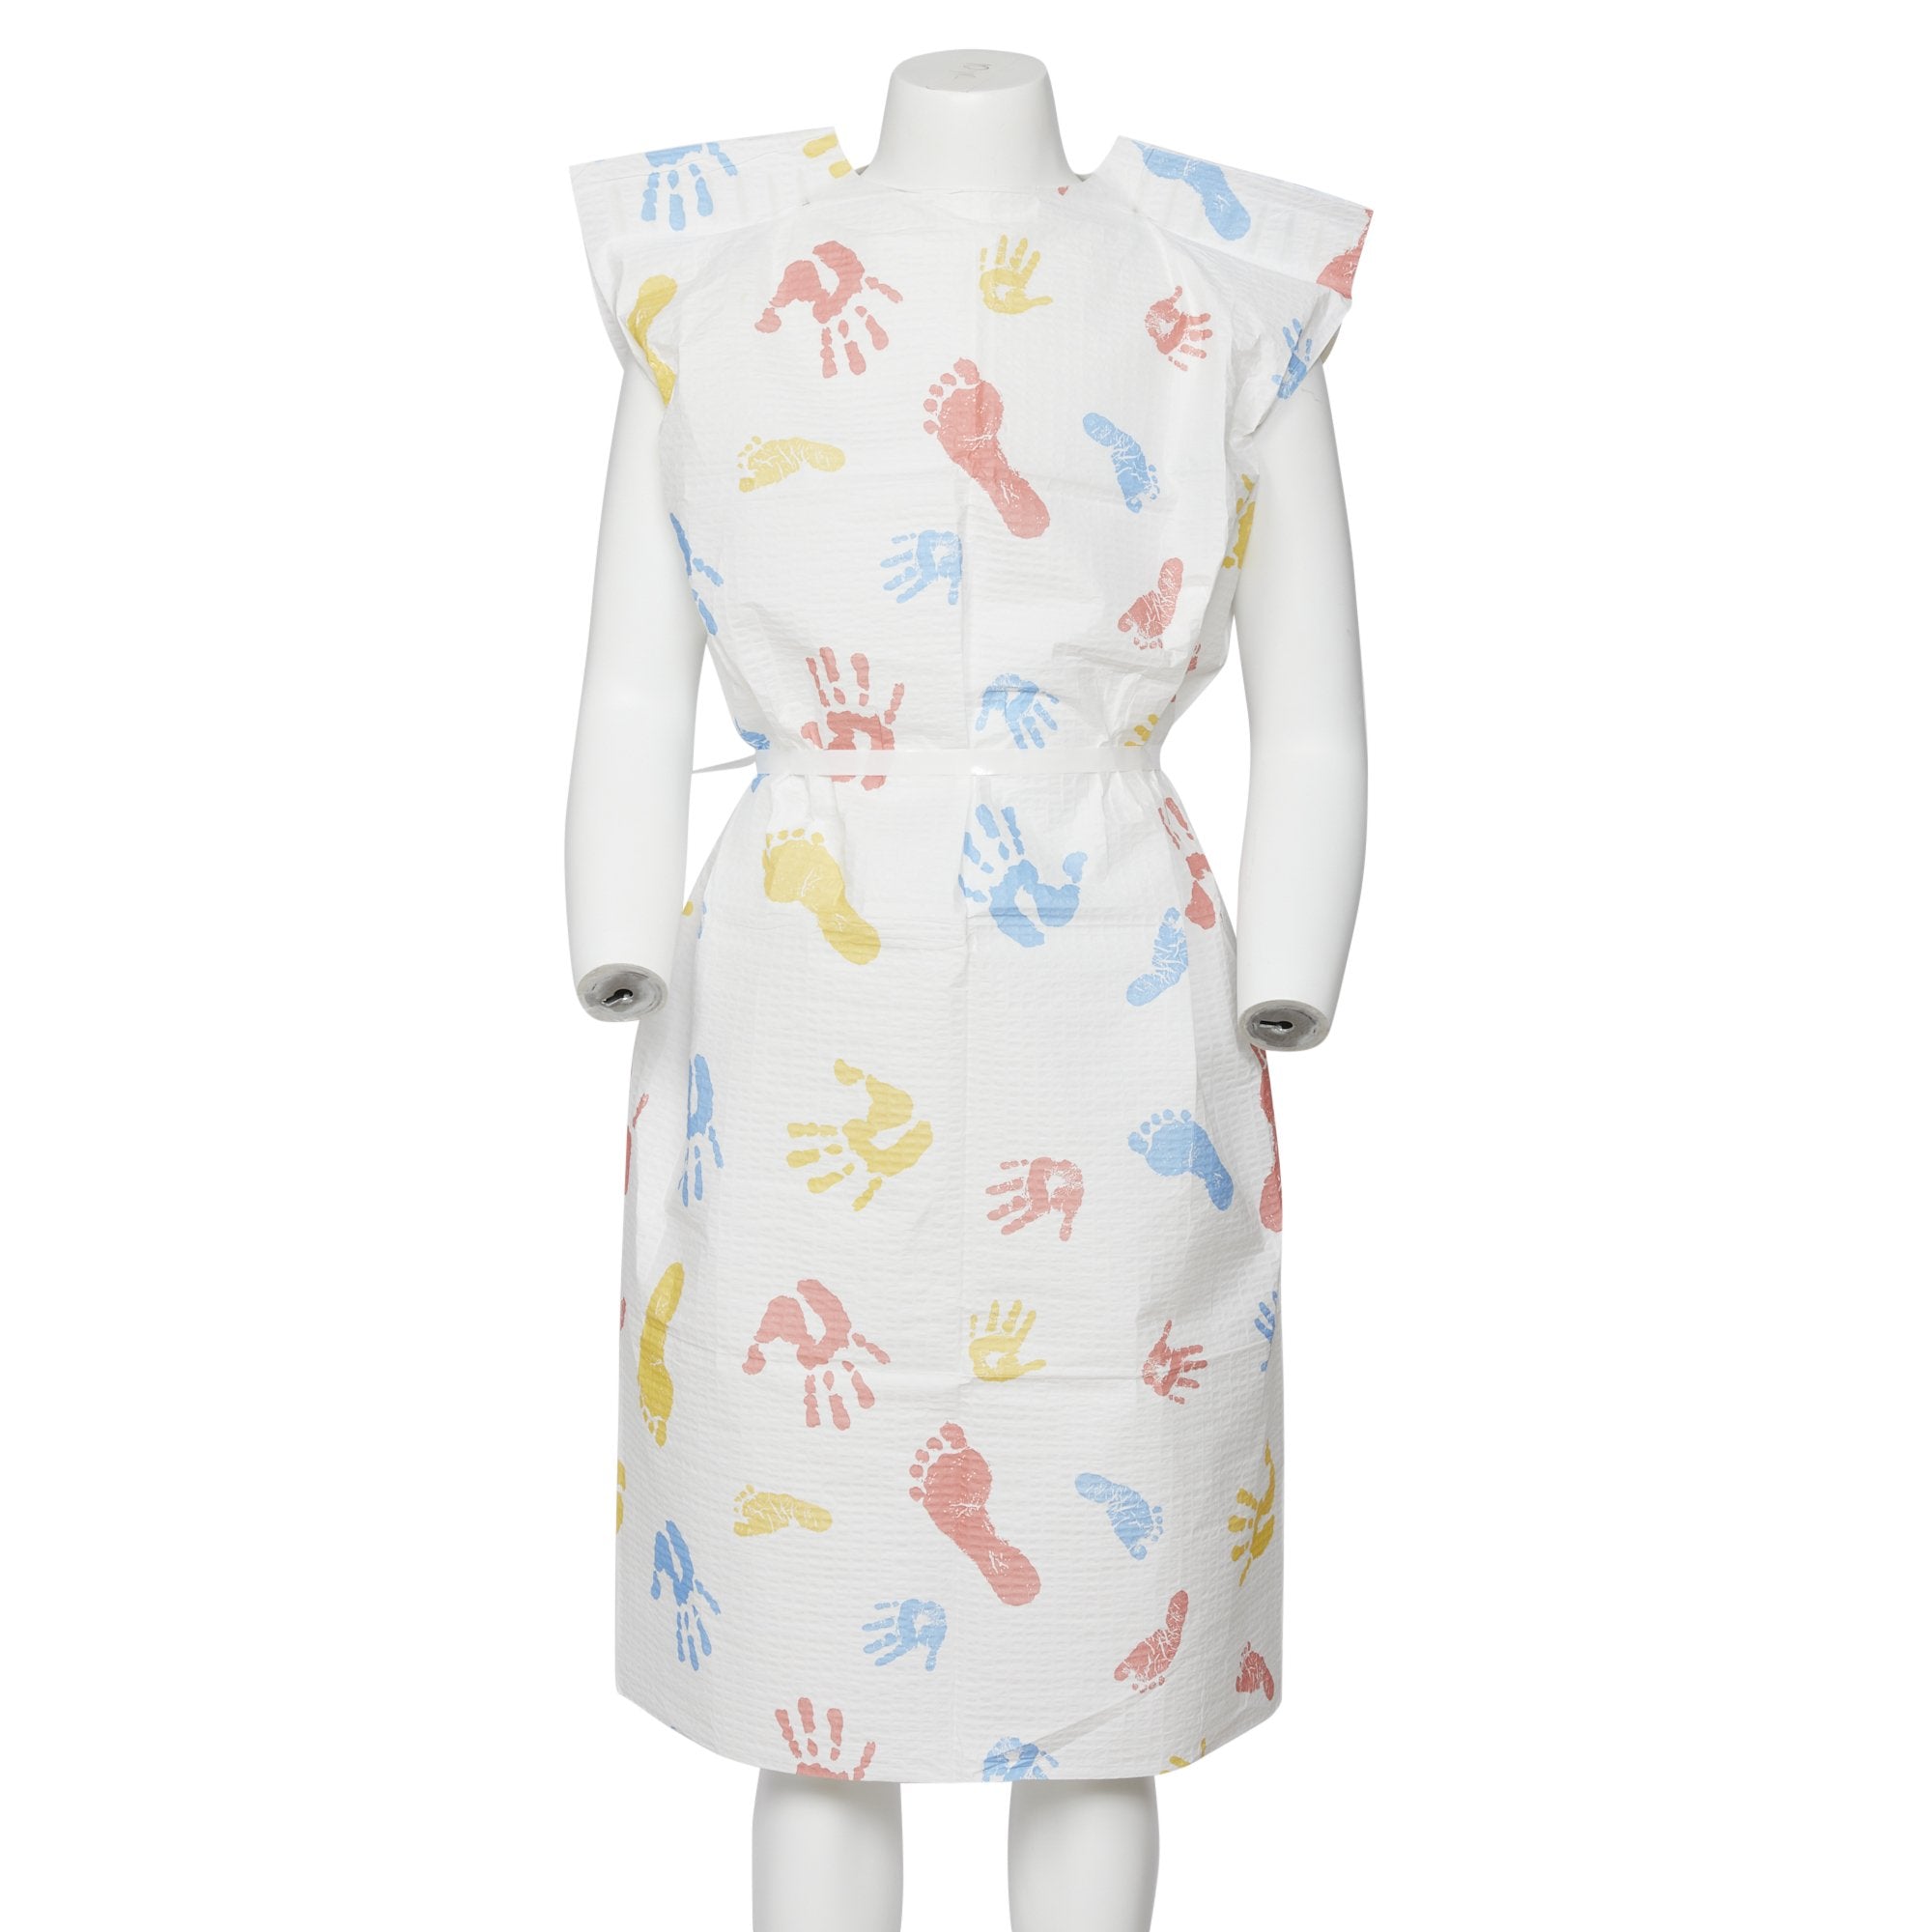 Graham Medical Products Pediatric Exam Gown, Tiny Tracks Print -Case of 50